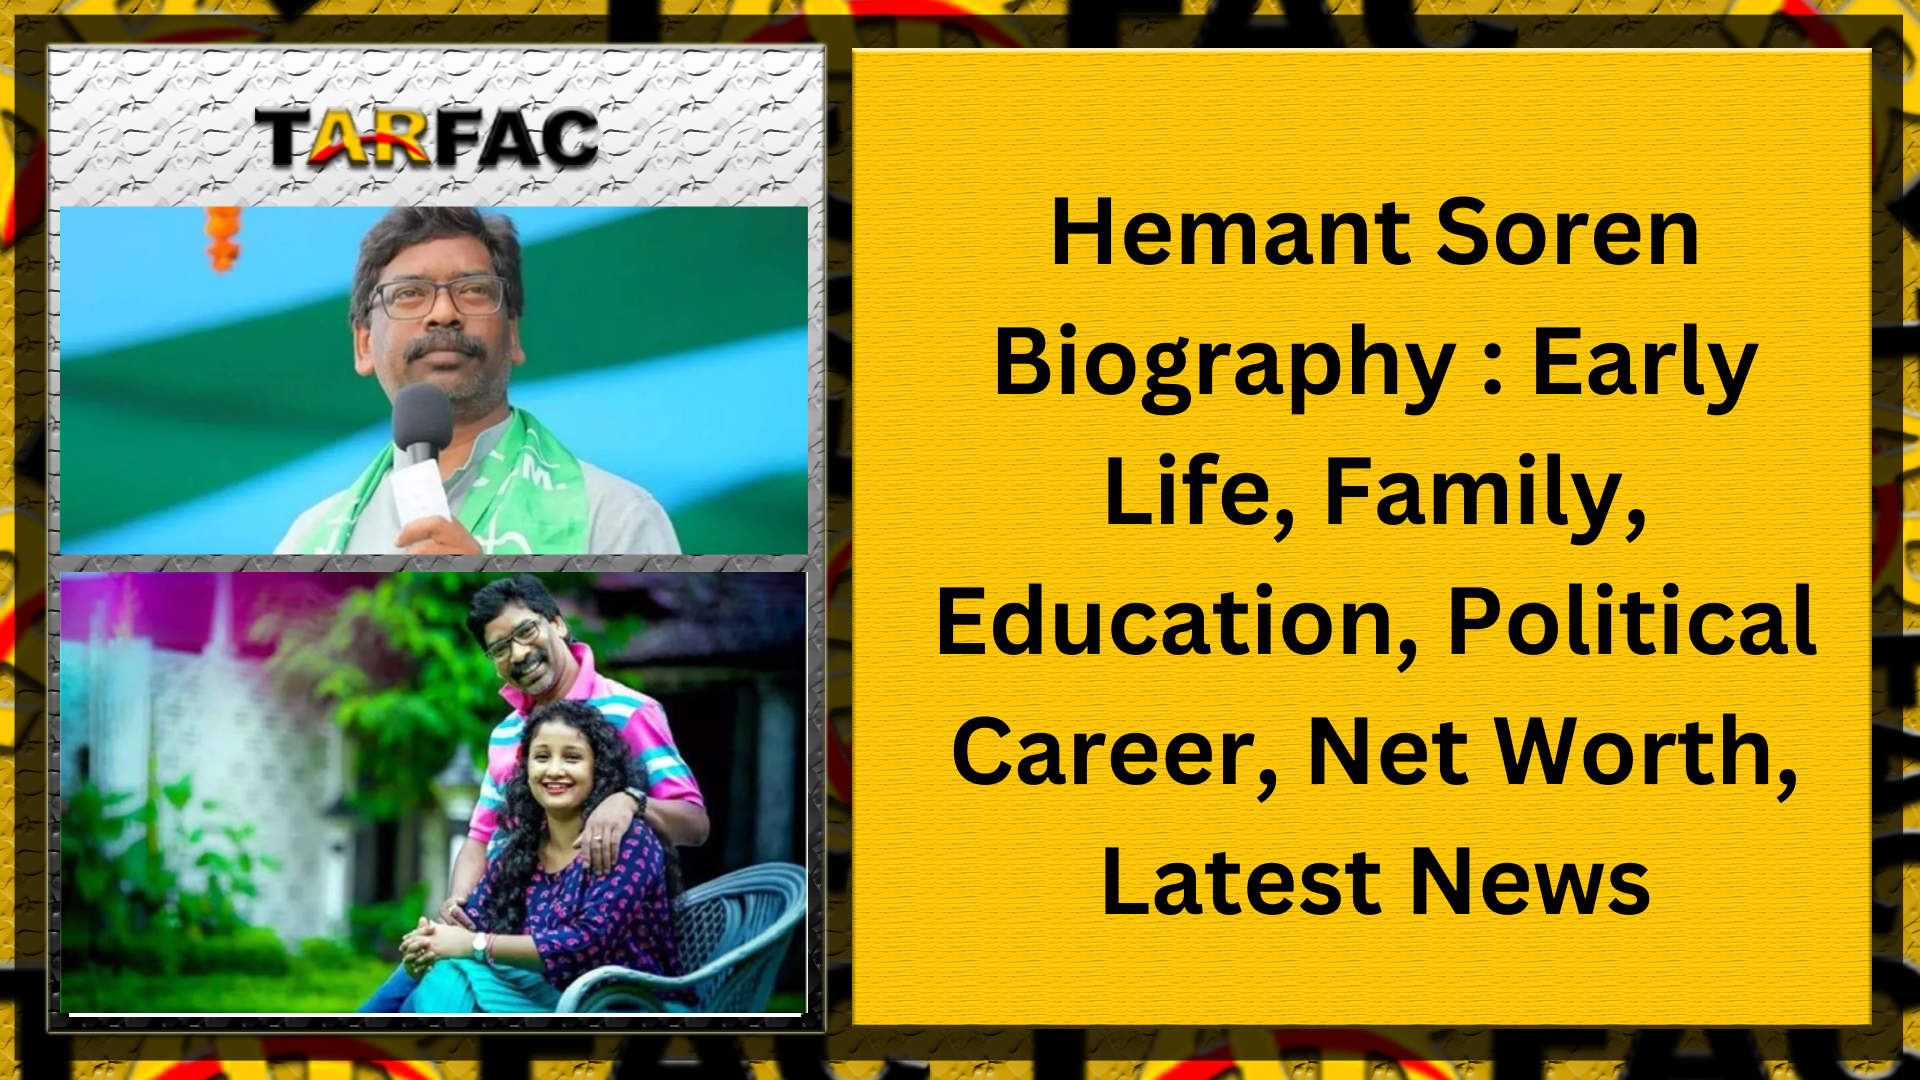 You are currently viewing Hemant Soren Biography : Early Life, Family, Education, Political Career, Net Worth, Latest News